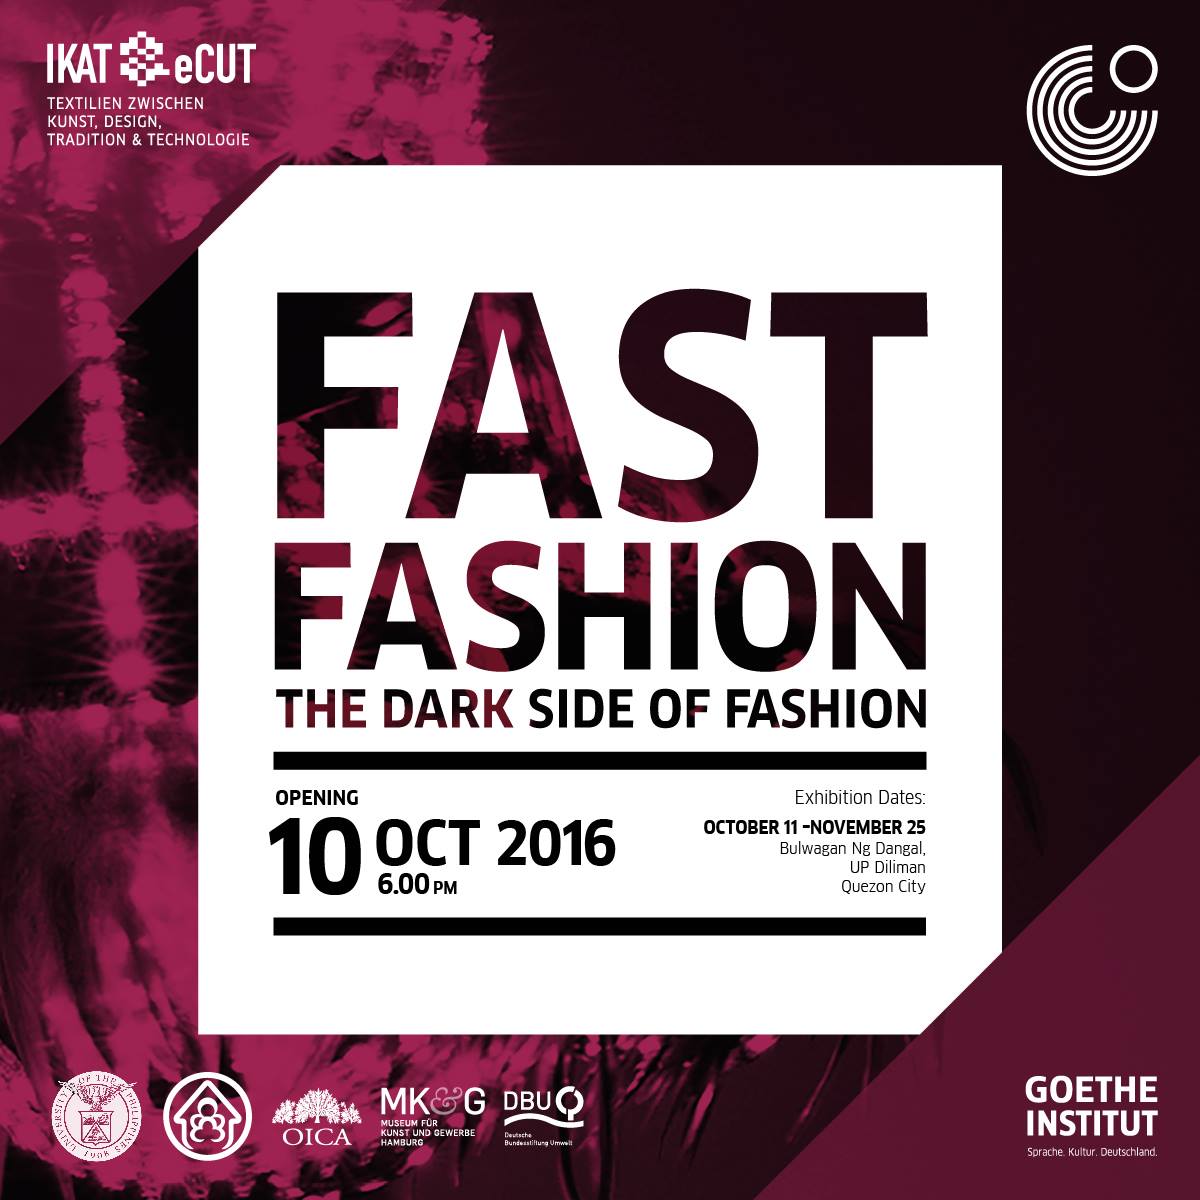 Fast Fashion: Exhibition Opening clock Monday, October 10 at 6 PM - 9 PM in UTC+08 · 77–86° Heavy Thunderstorm pin Show Map Bulwagan Ng Dangal Quezon City, Philippines About Discussion Write Post Add Photo / Video Create Poll Details The Goethe-Institut Philippinen in partnership with the College of Home Economics, UP Diliman (UP CHE) presents FAST FASHION, an exhibition on the dark side of the fashion industry. The exhibition opens on October 10 at 6:00 PM at Bulwagan Ng Dangal, University of the Philippines Diliman (Main Library), in Quezon City. Fast Fashion will be available for viewing free-of-charge until November 25. Part of Goethe-Institut's larger Ikat/eCut project, FAST FASHION is an exhibition by the Museum für Kunst und Gewerbe Hamburg made possible by Karin Stilke Stiftung + DBU Deutsche Bundesstiftung Umwelt. More info on the exhibit here: www.fastfashion-dieausstellung.de/en/ #FastFashionPH ----- Join us for the opening of FAST FASHION, an exhibition on the not-so-glamorous side of the fashion industry. Mon, Oct 10 | 6:00 PM | Bulwagan Ng Dangal, UP Diliman Admission is free! The opening night features a fashion show with works by notable fashion designers from here and Germany, accompanied live by the music of Tarsius. #FastFashionPH #SlowFashion #GoetheManila